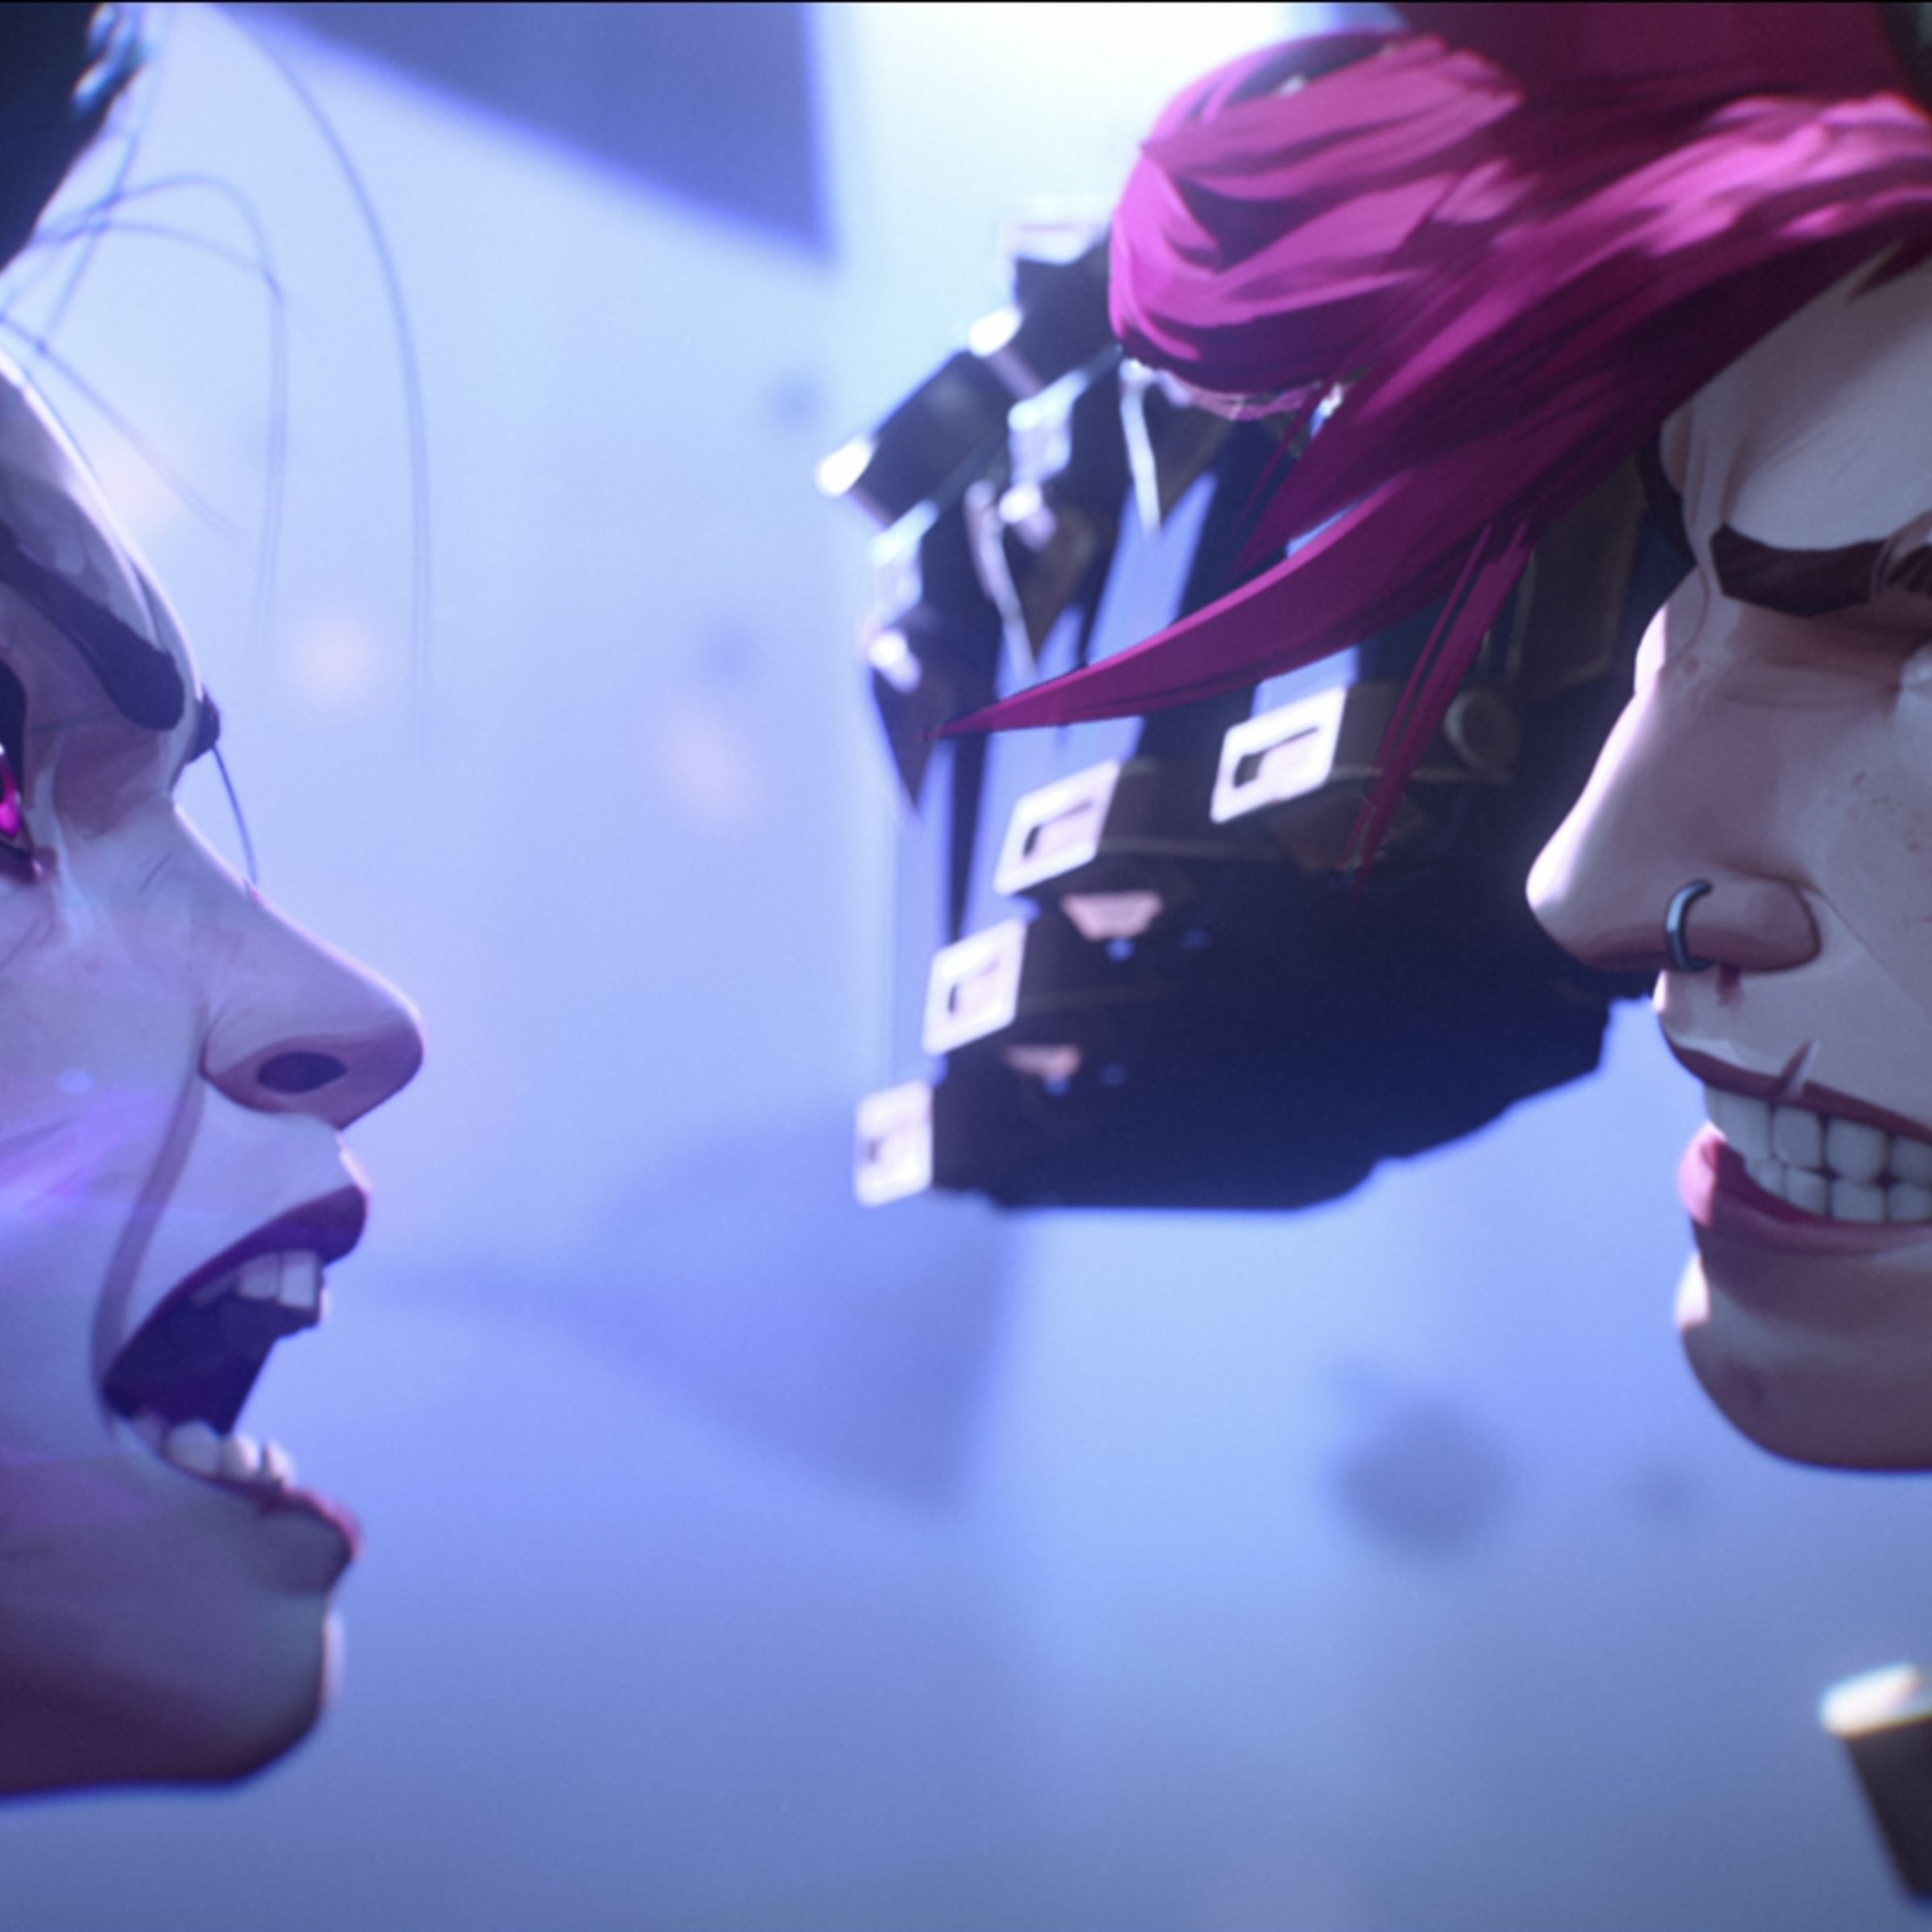 An image showing Jinx and Vi in the second season of Arcane